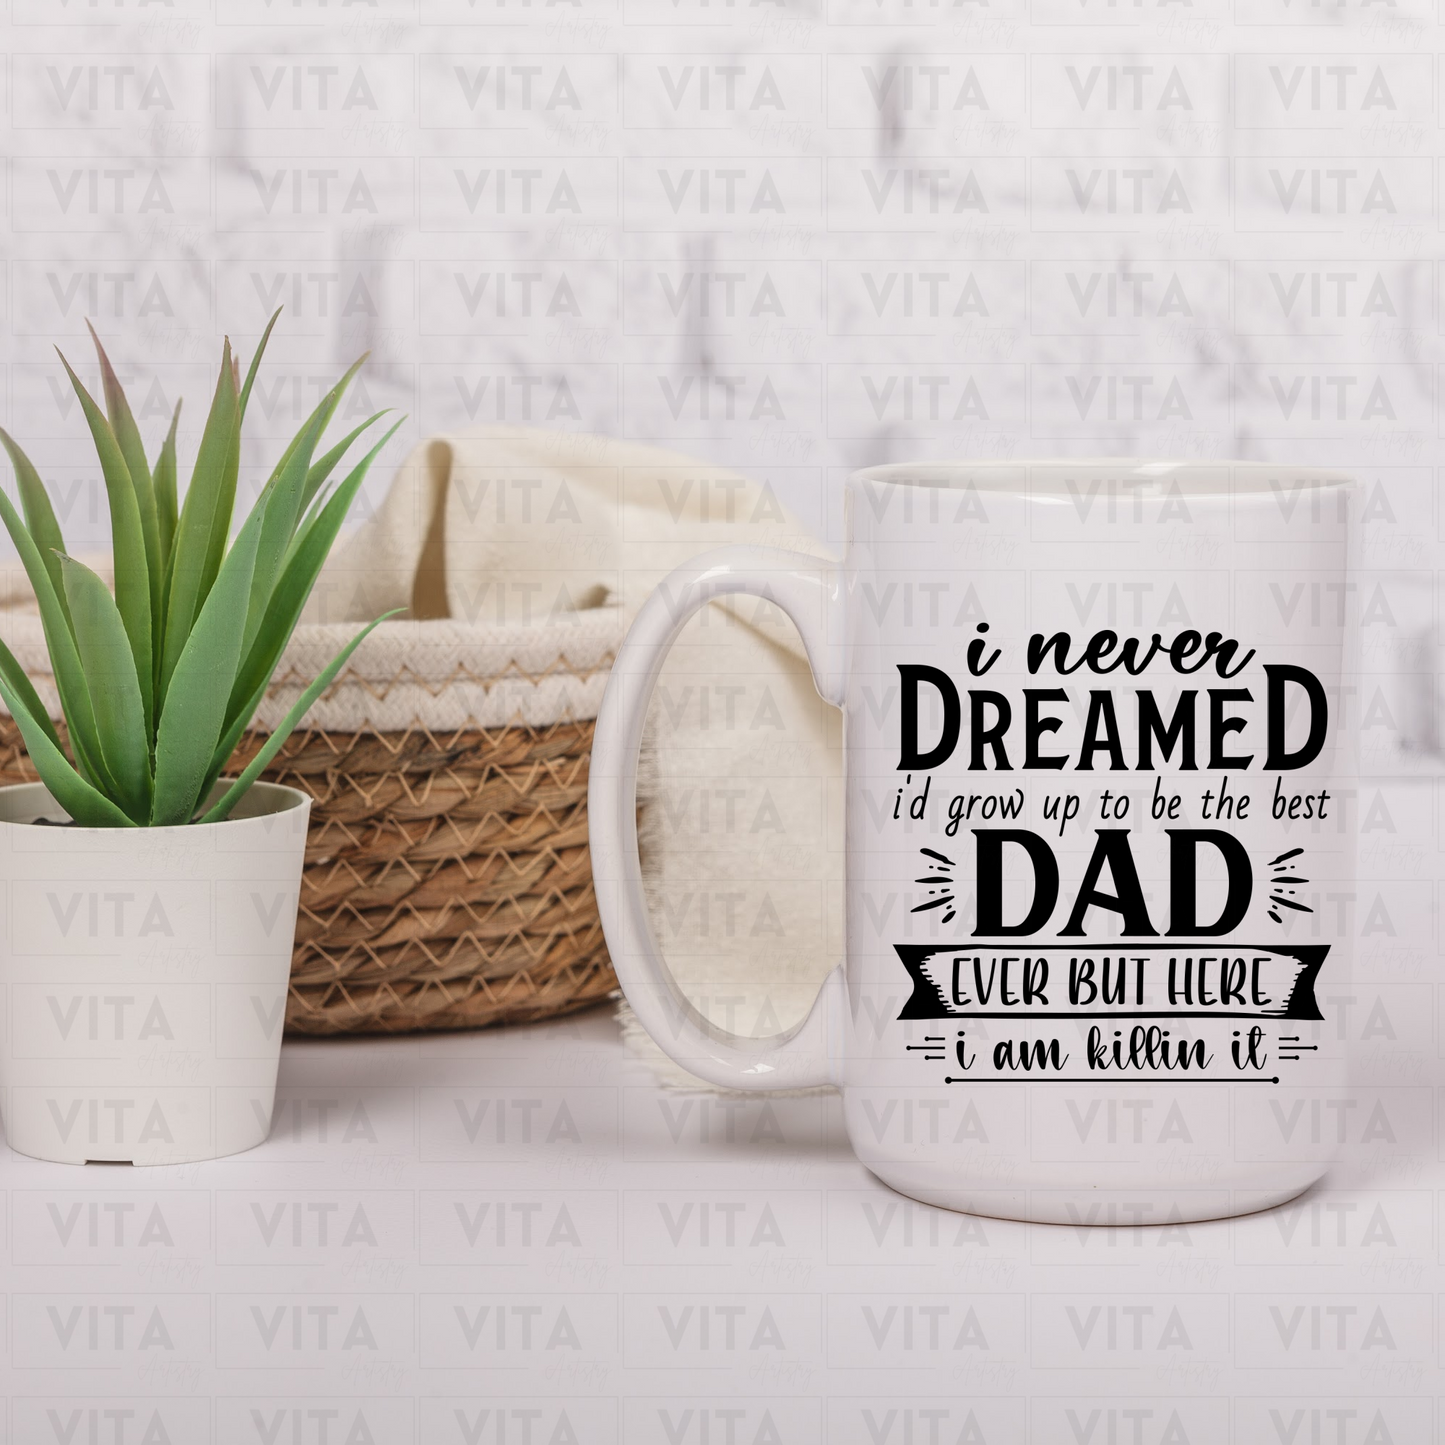 I Never Dreamed I'd Grow Up To Be the Best Dad but Here I am Killing It - Dad/Daddy/Father Ceramic Mug